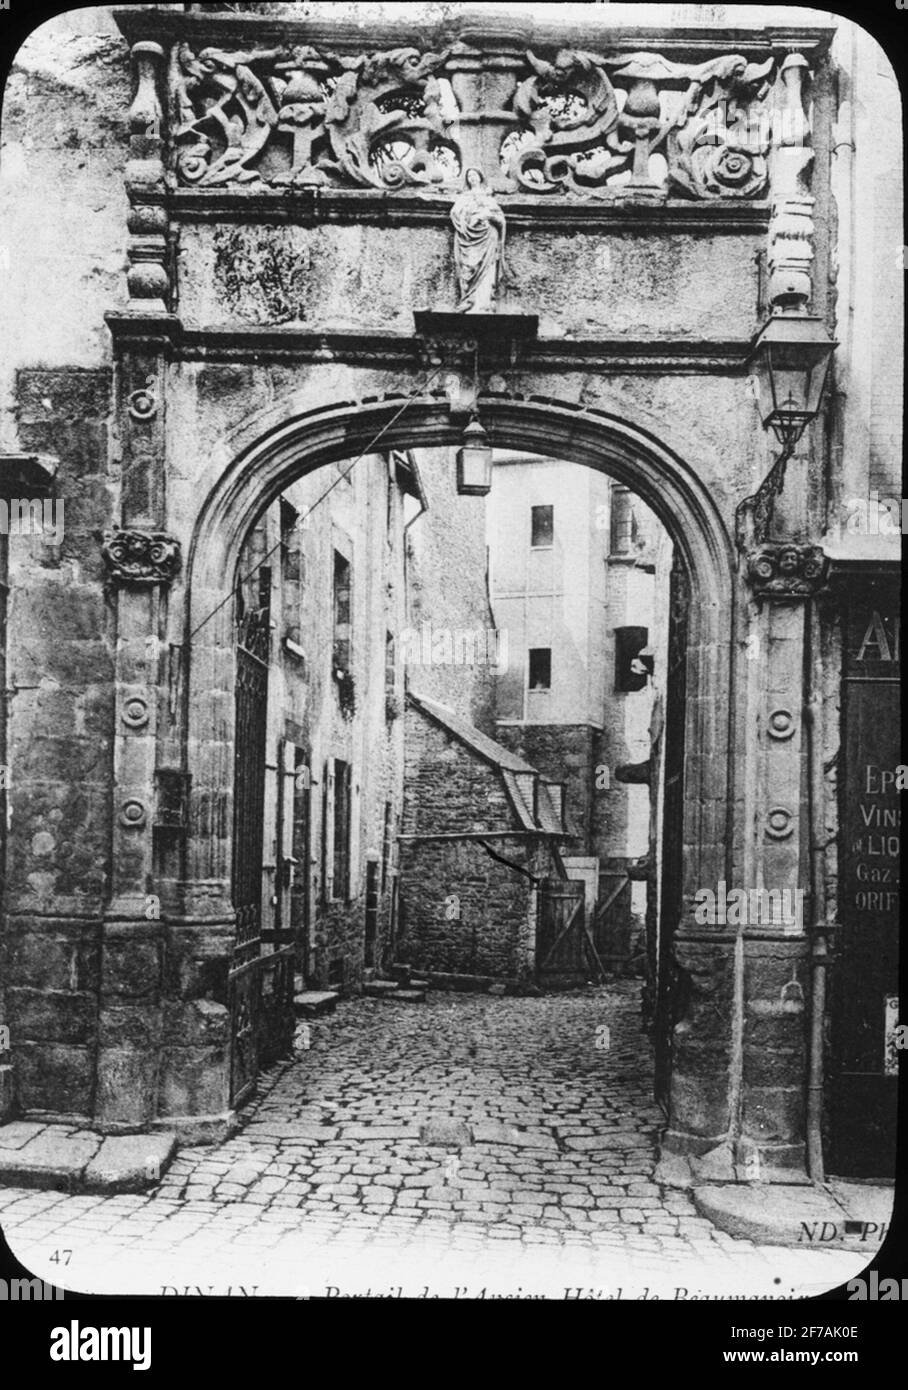 SkiopT icon image with printed motifs of the port to Hôtel de Beaumanoir, Dinan.The image has been stored in cardboard labeled: the journey 1908. Dinan 7. XV. Text on image: 'Portail de l'Ancien Hôtel de Beaumanoir'. Stock Photo